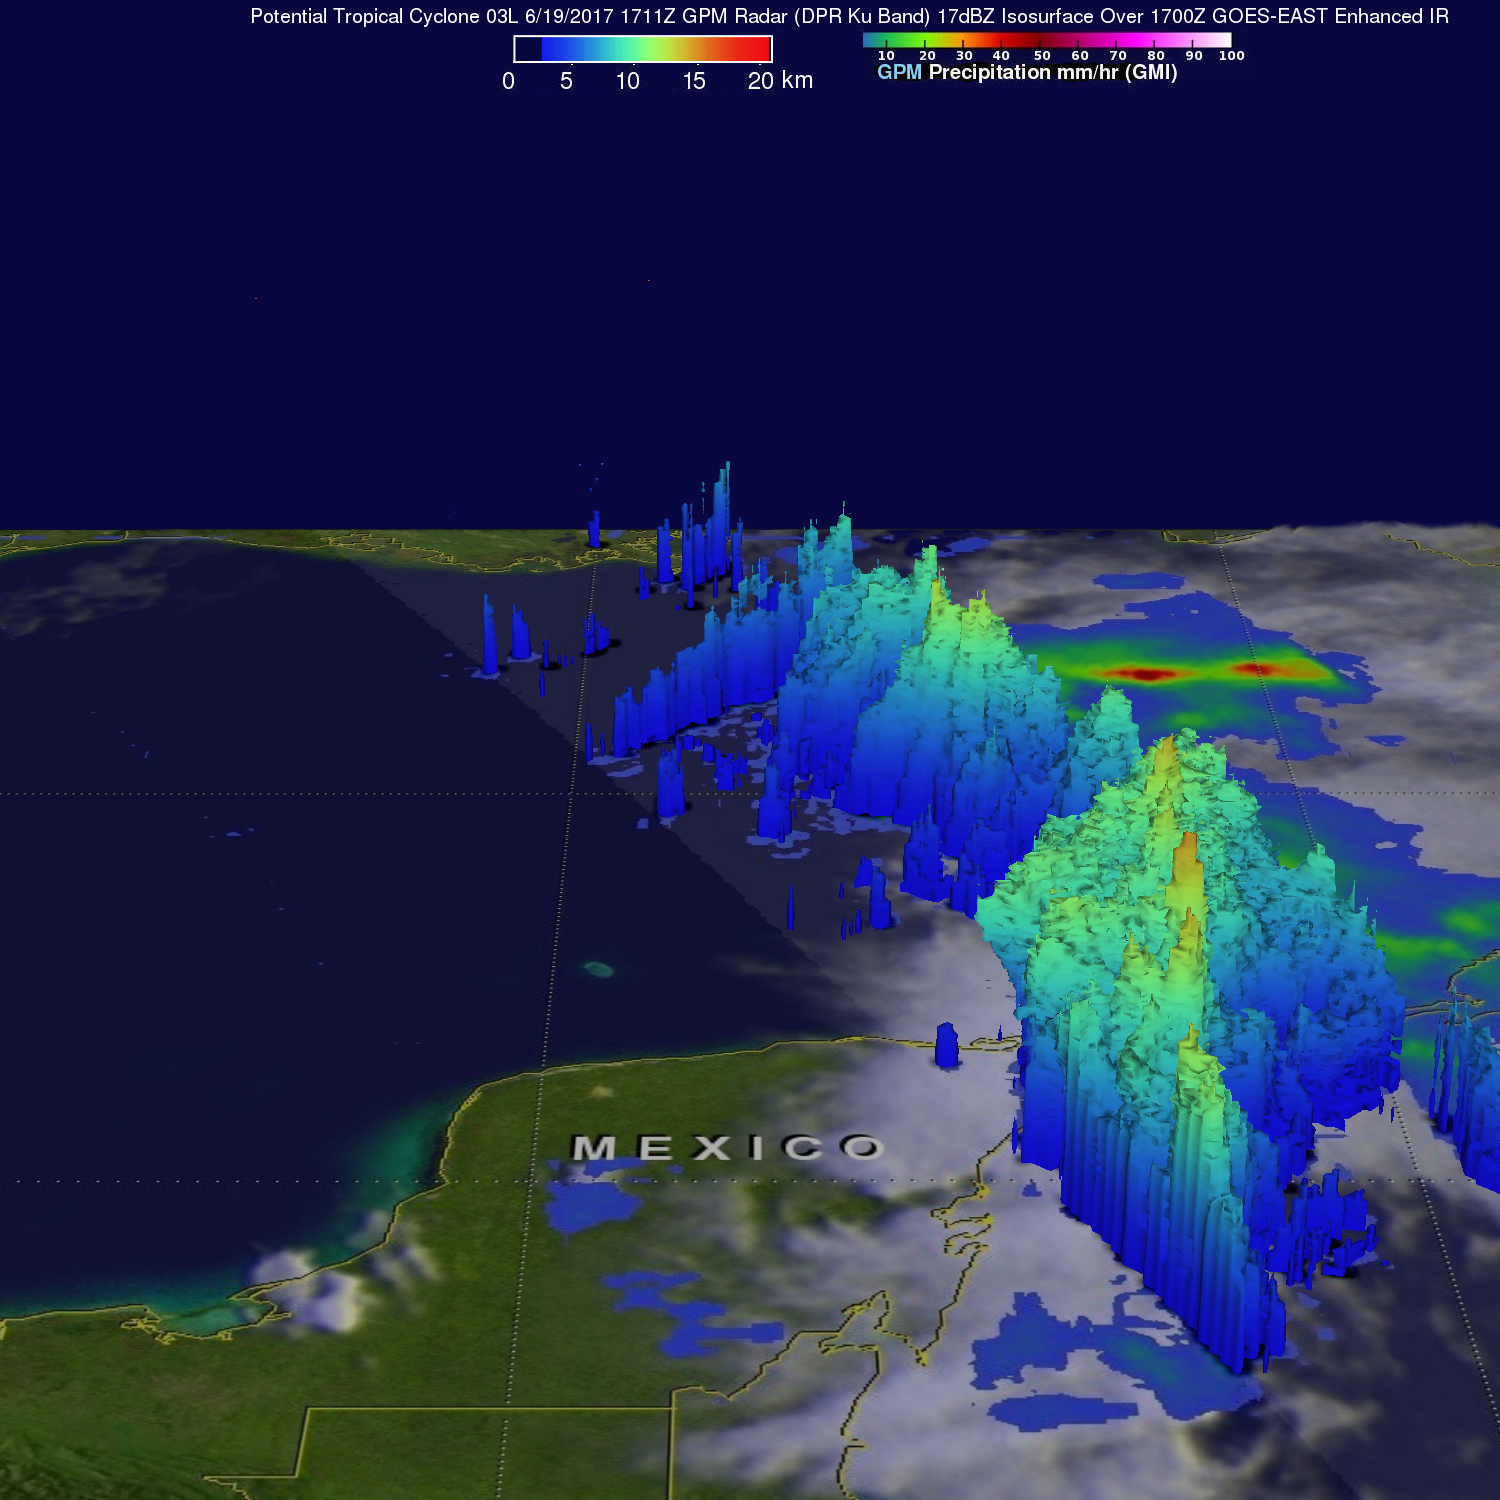 GPM 3-D image of Potential Cyclone 3